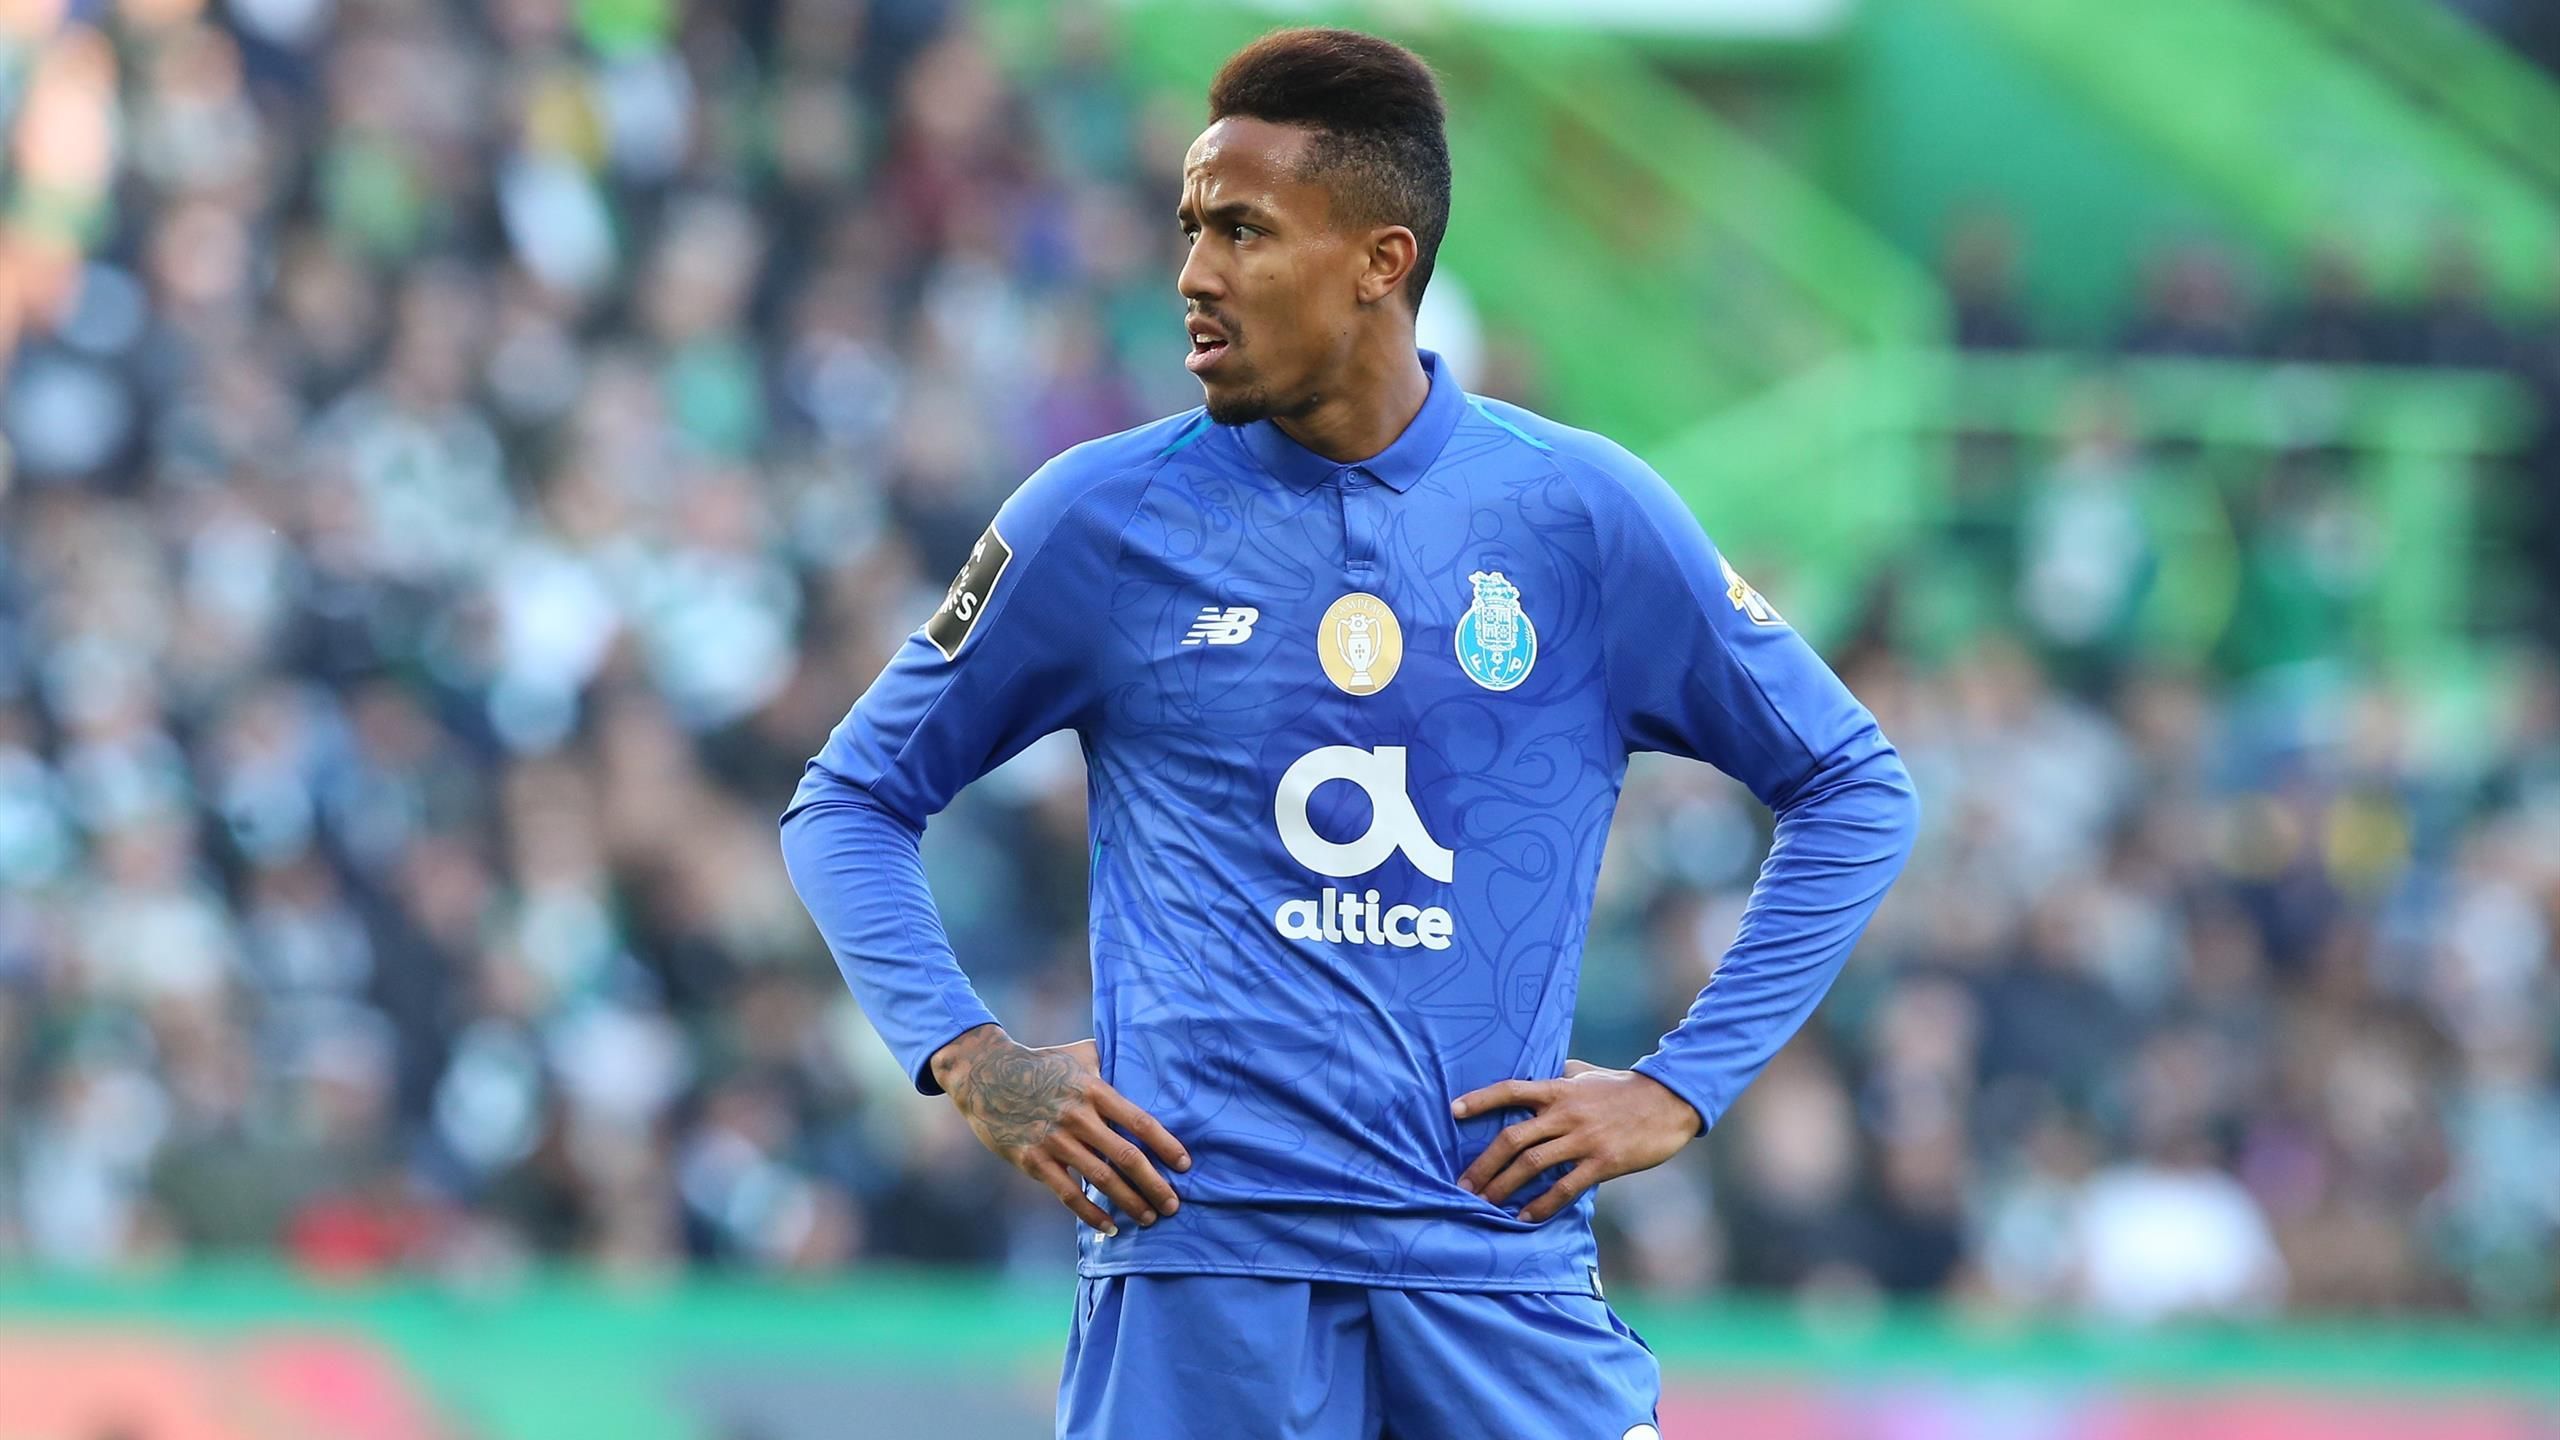 Football news Madrid to sign Porto's Eder Militao in £42.7m